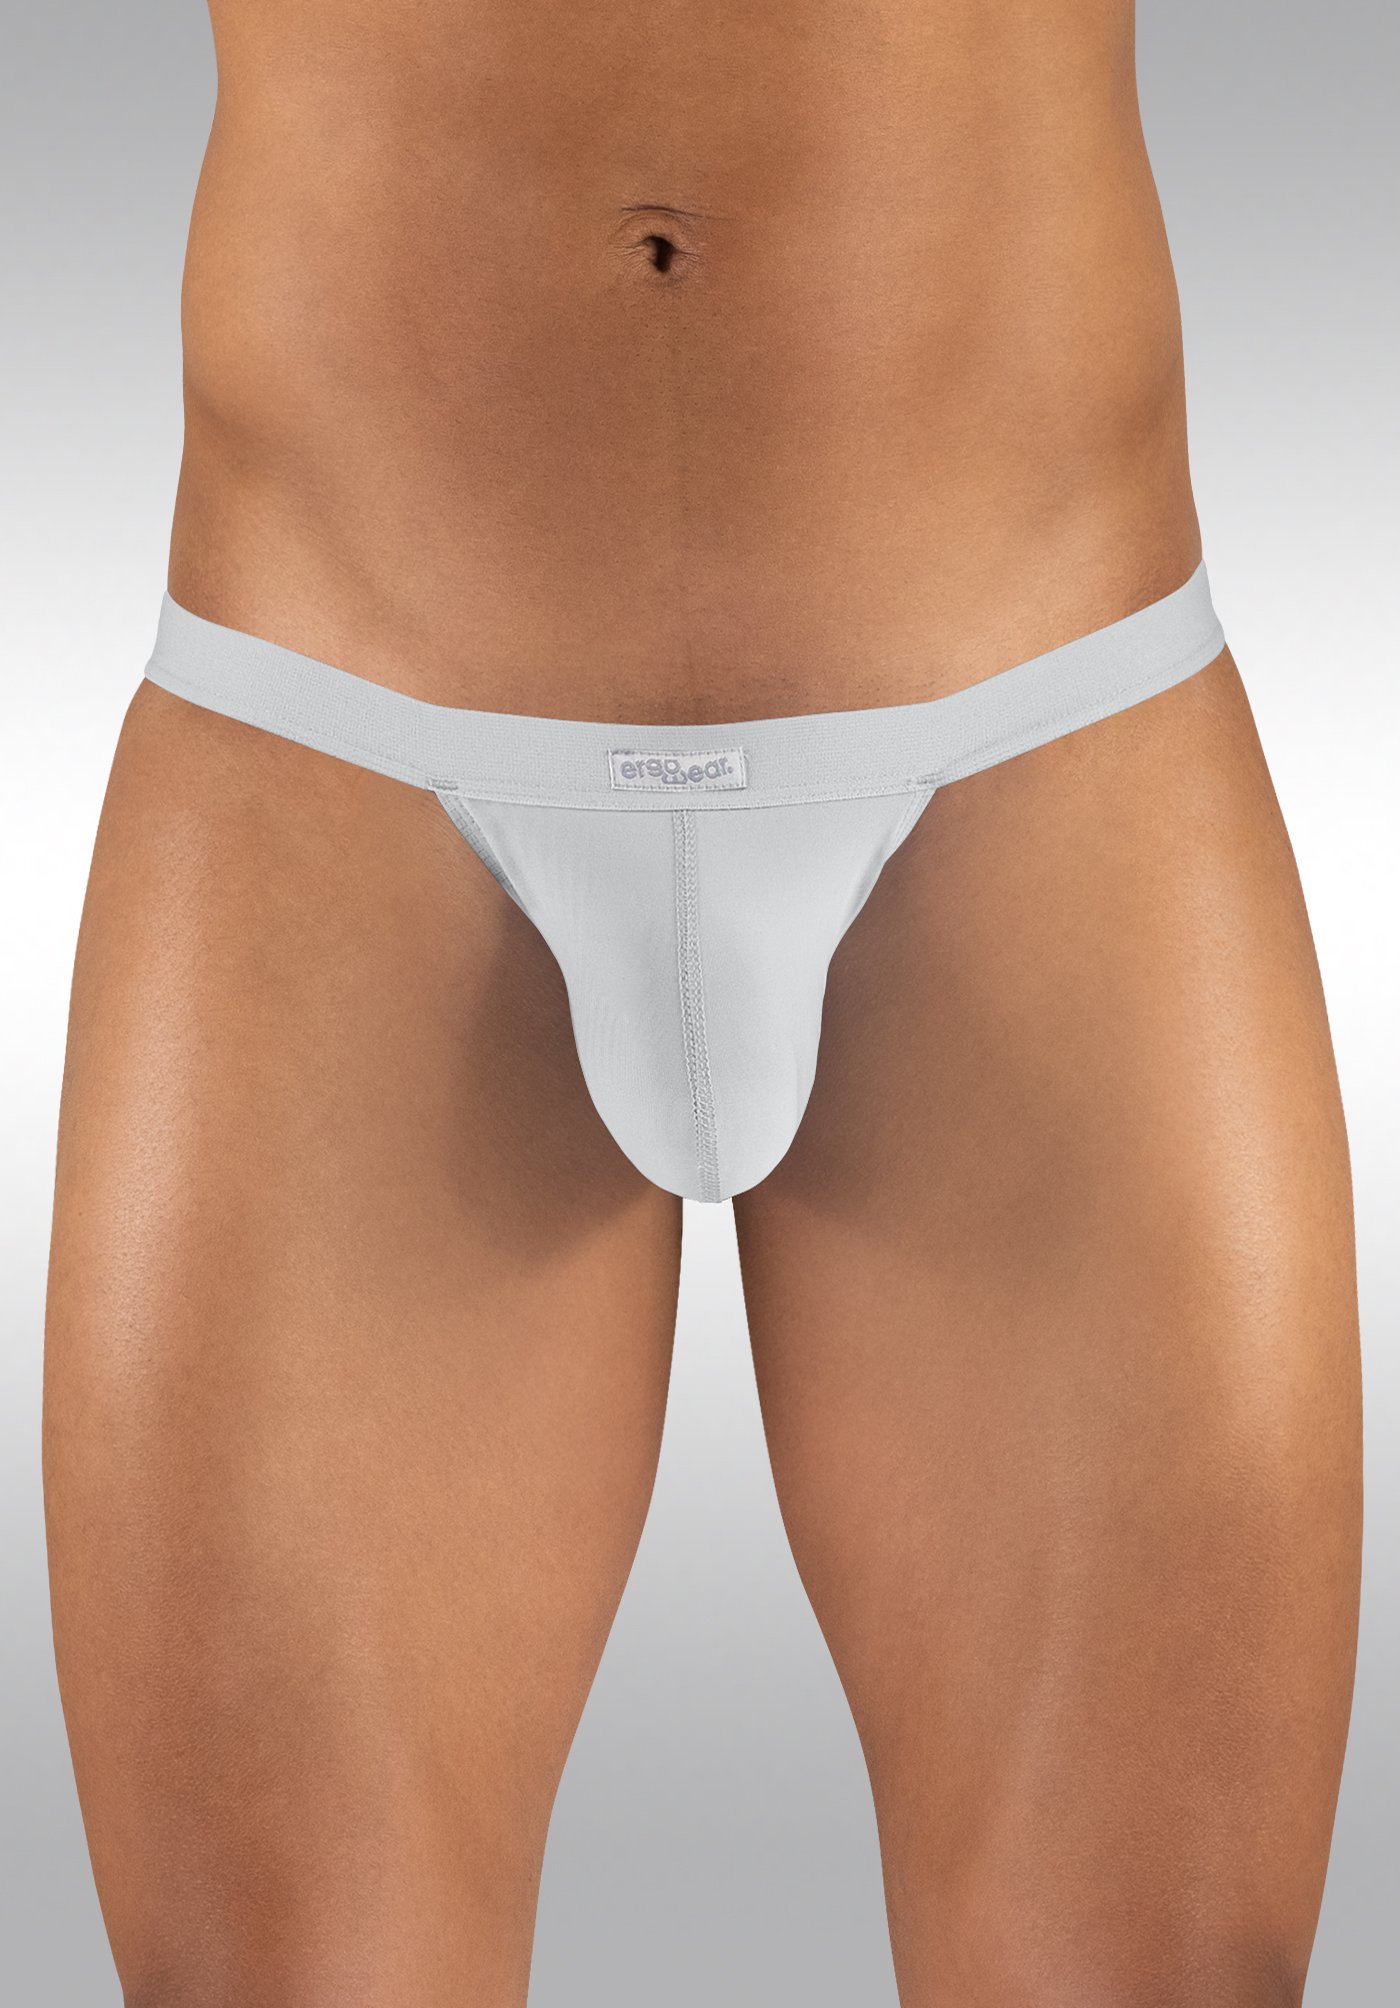 6 Must-Have Male Thongs For a Special Valentine's Day - Ergowear